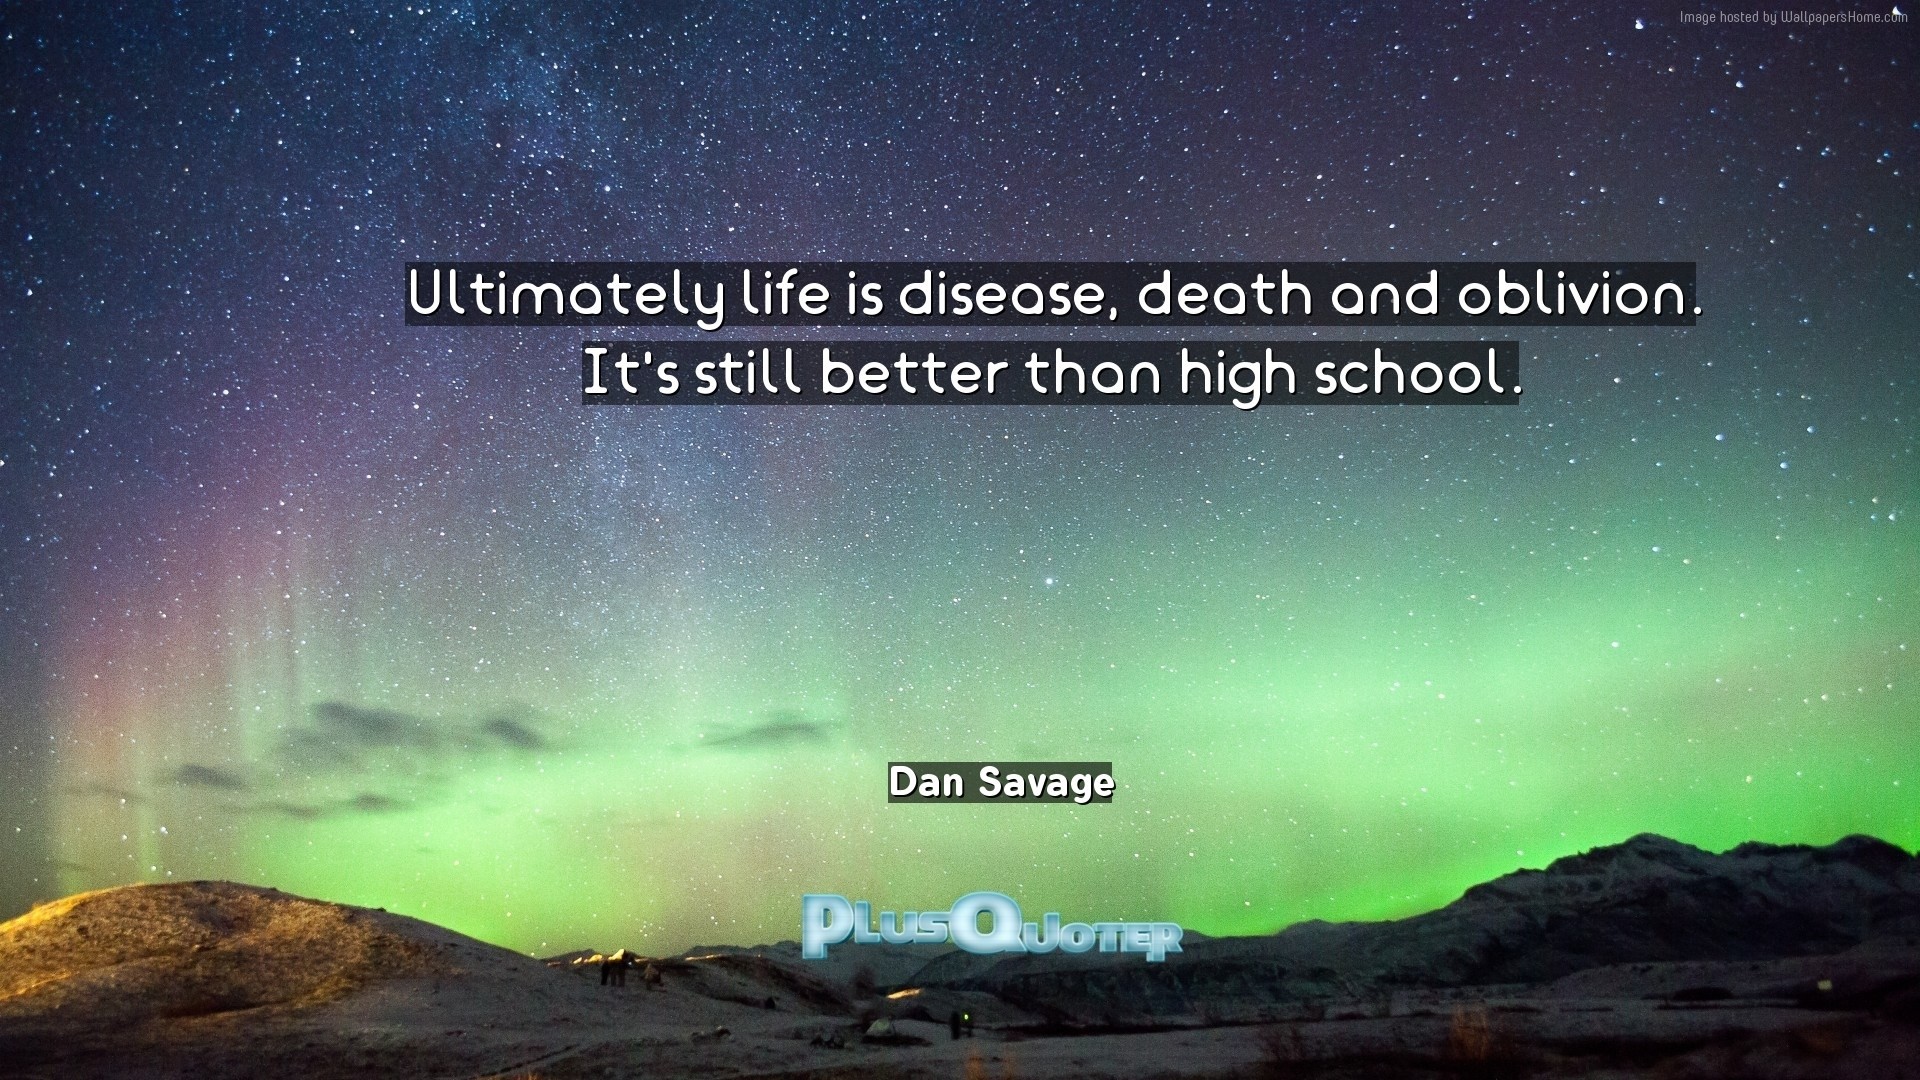 1920x1080 Download Wallpaper with inspirational Quotes- "Ultimately life is disease,  death and oblivion.